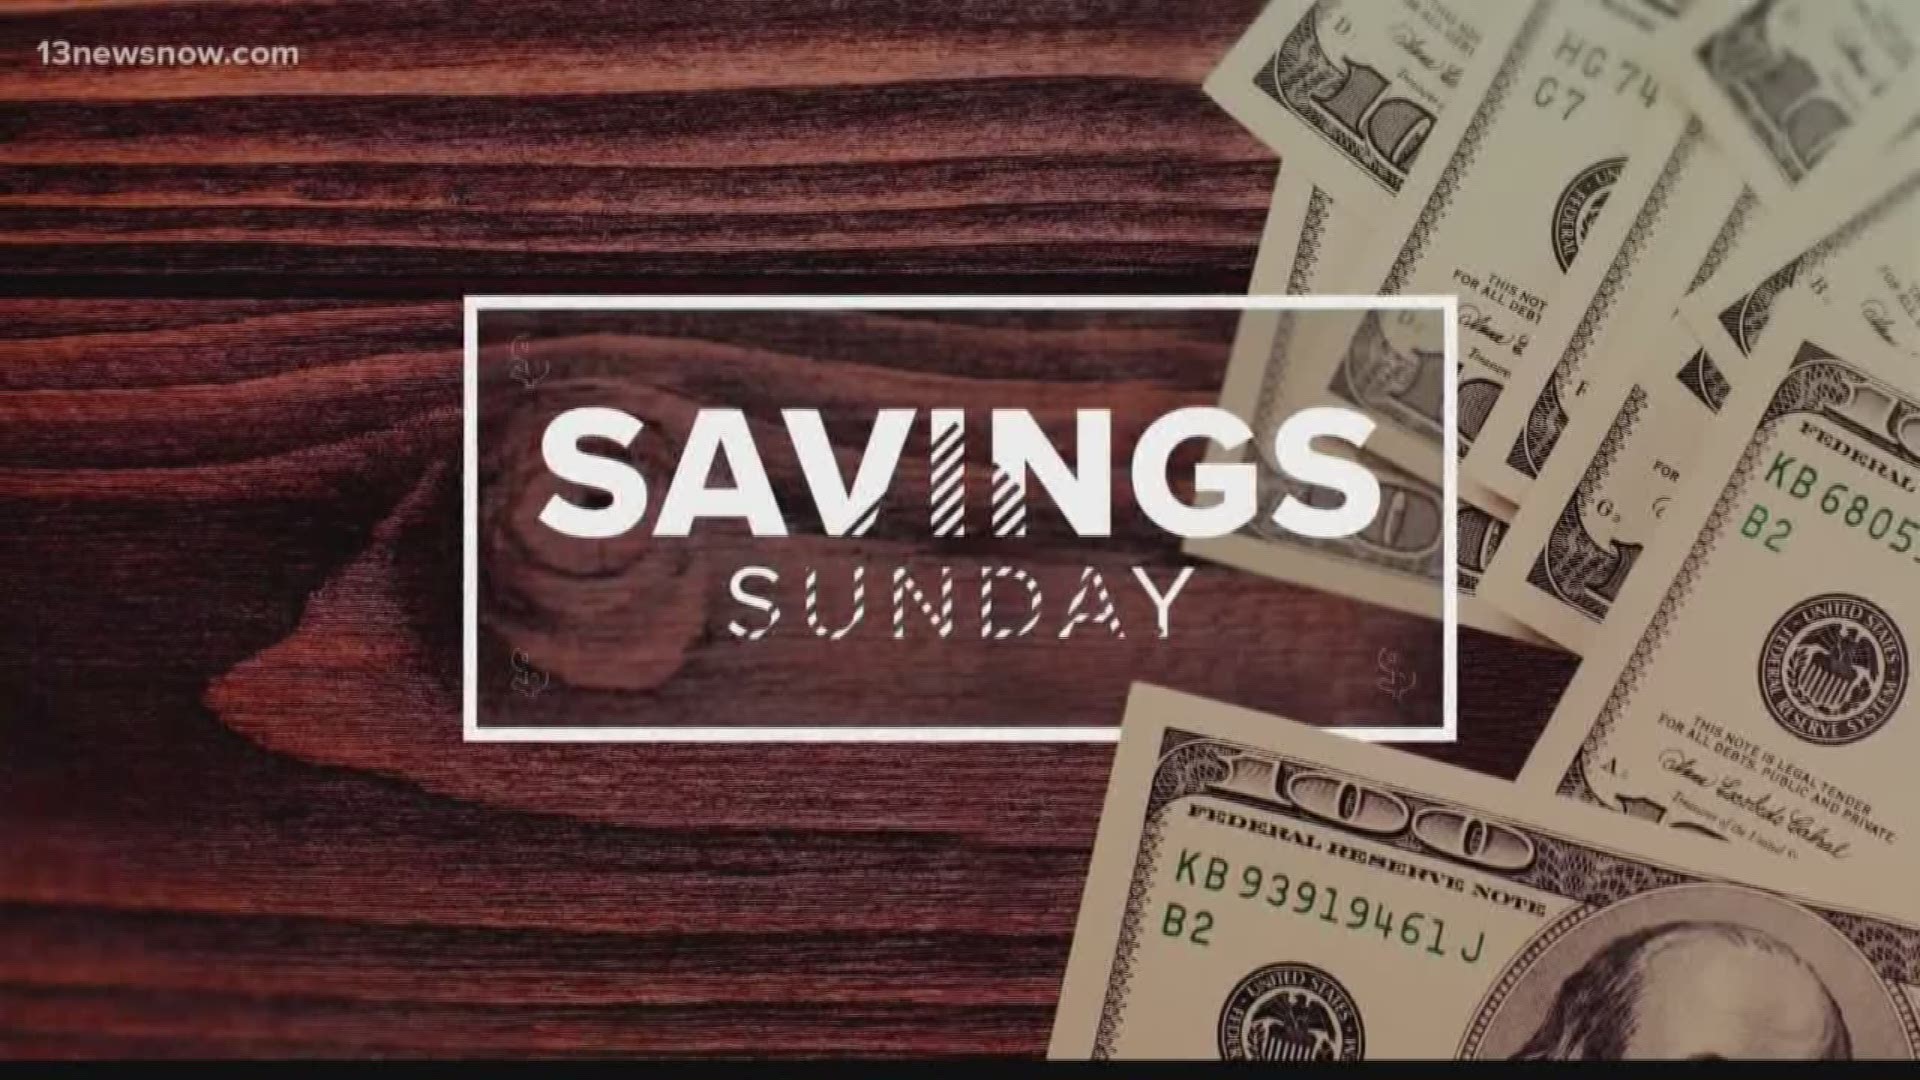 Laura Oliver from www.afrugalchick.com has your big savings for the week of Feb. 3, 2019.